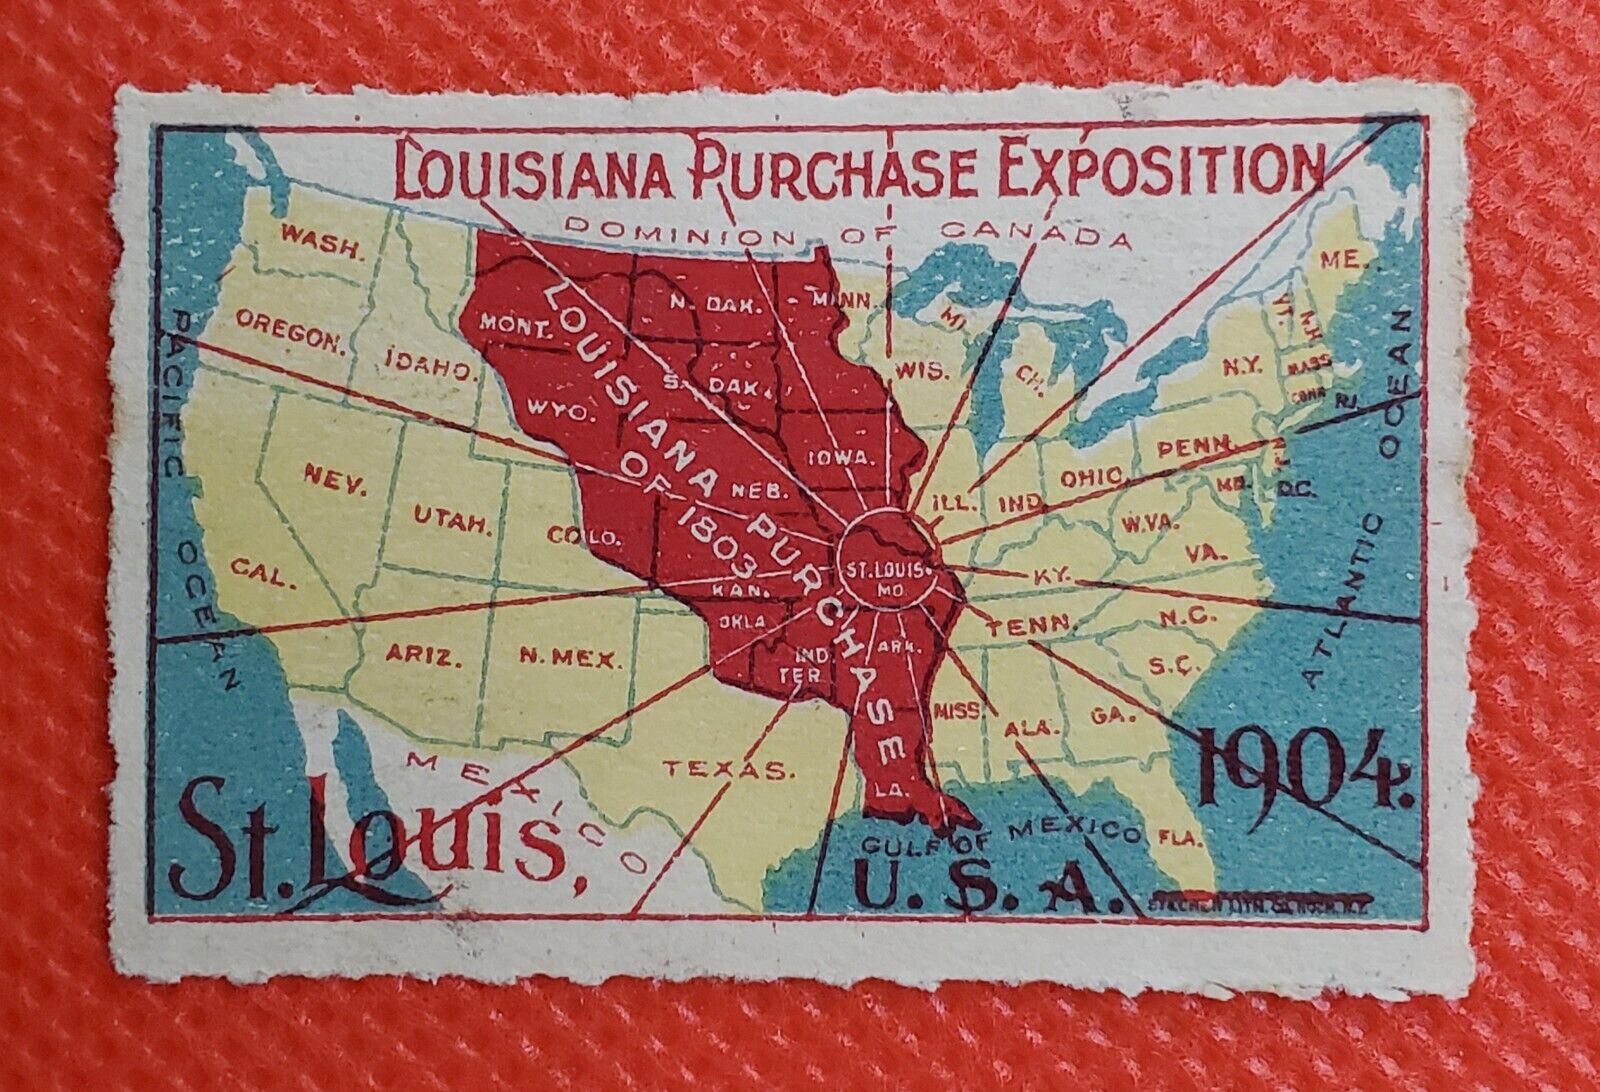 1904 Louisiana Purchase Exposition Bright Colors Poster Stamp Mint NH No Gum